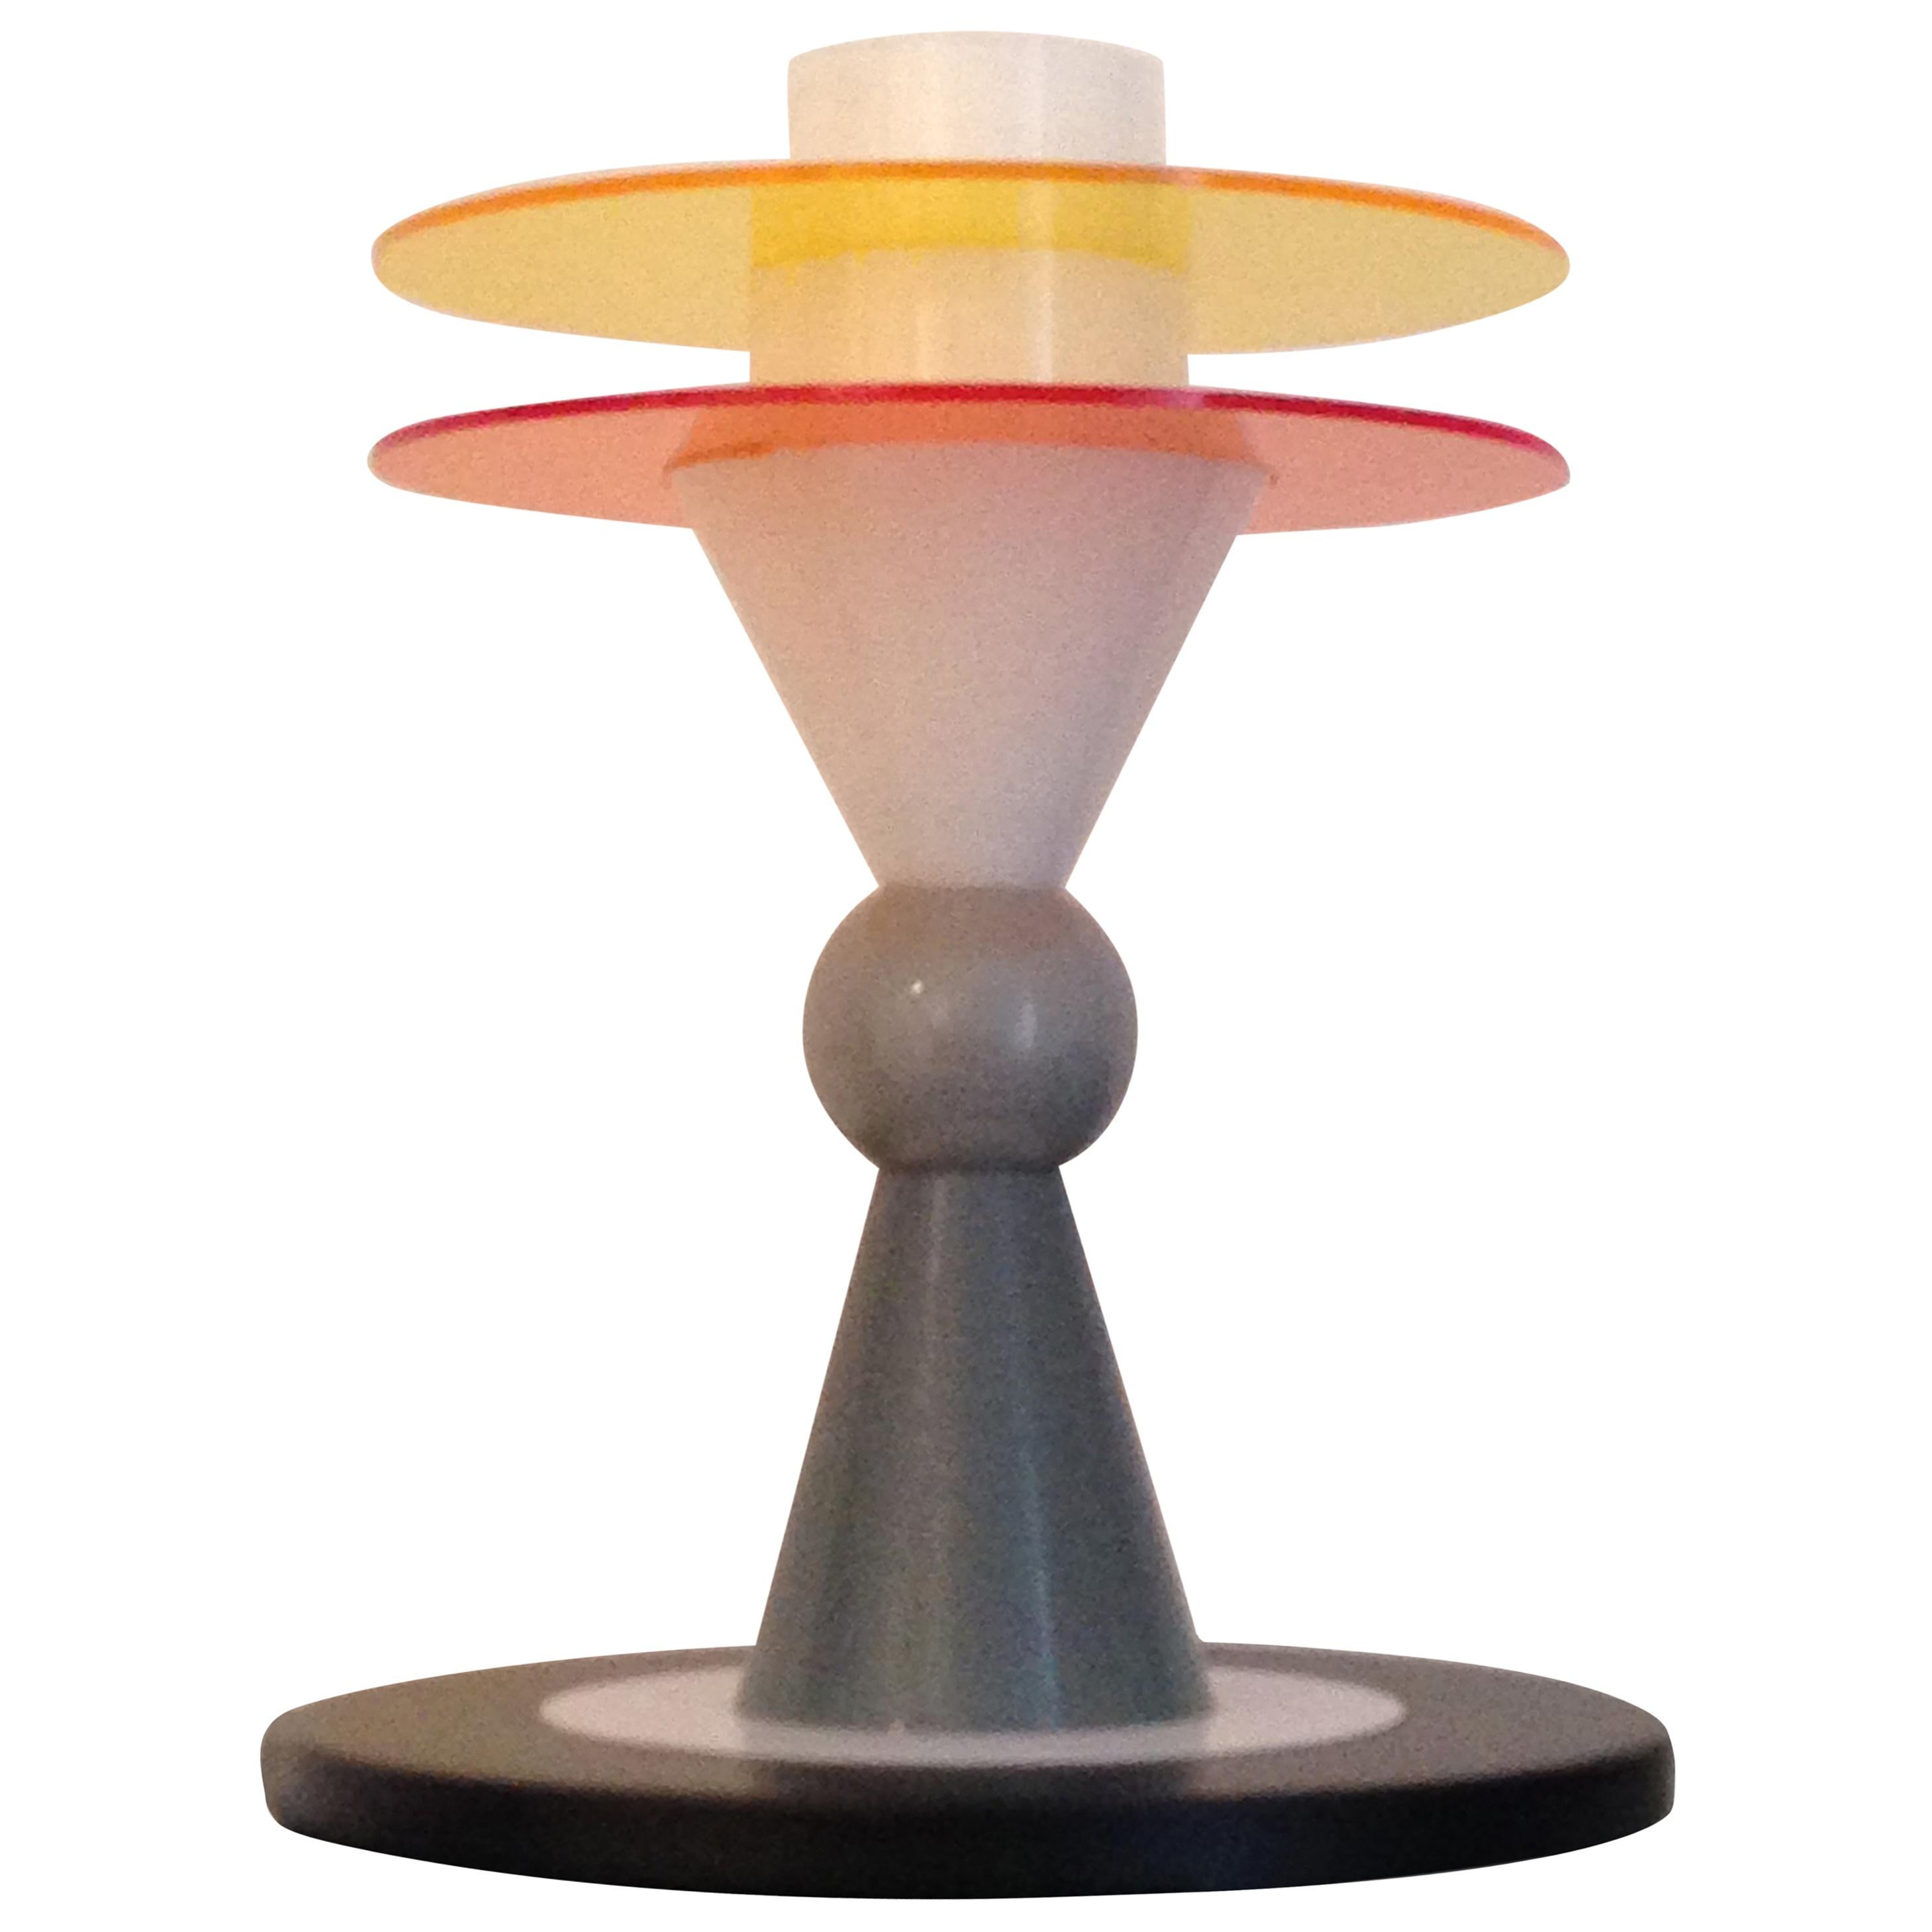 BAY Table Lamp by Ettore Sottsass for Memphis Milano